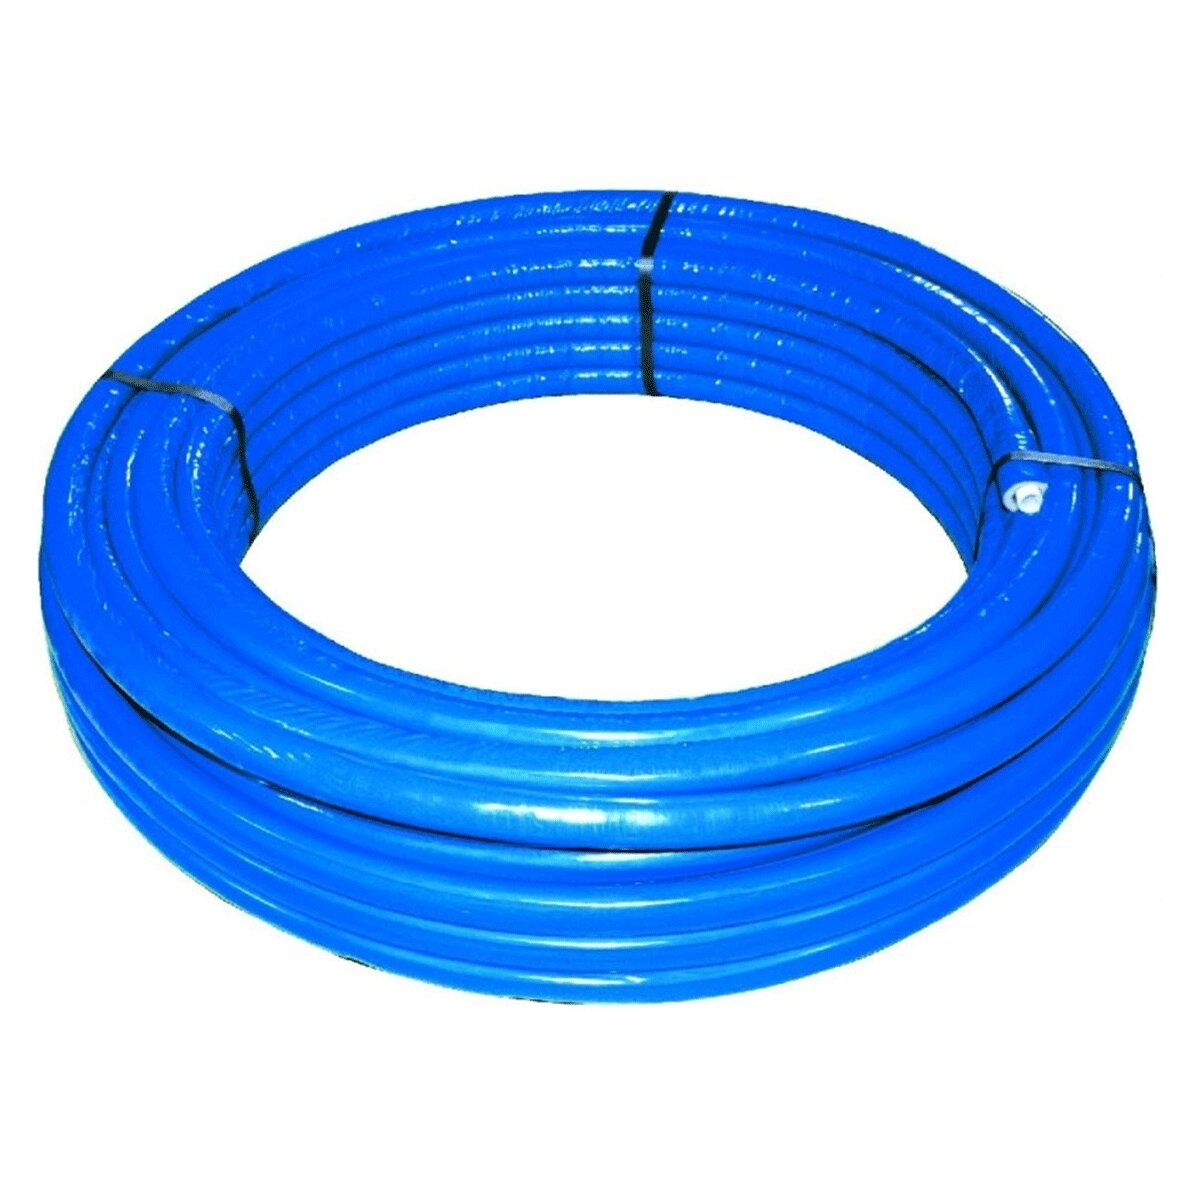 Valsir Mixal multilayer pipe Ø16X2 mm with 10 mm thermal insulating sheath Blue